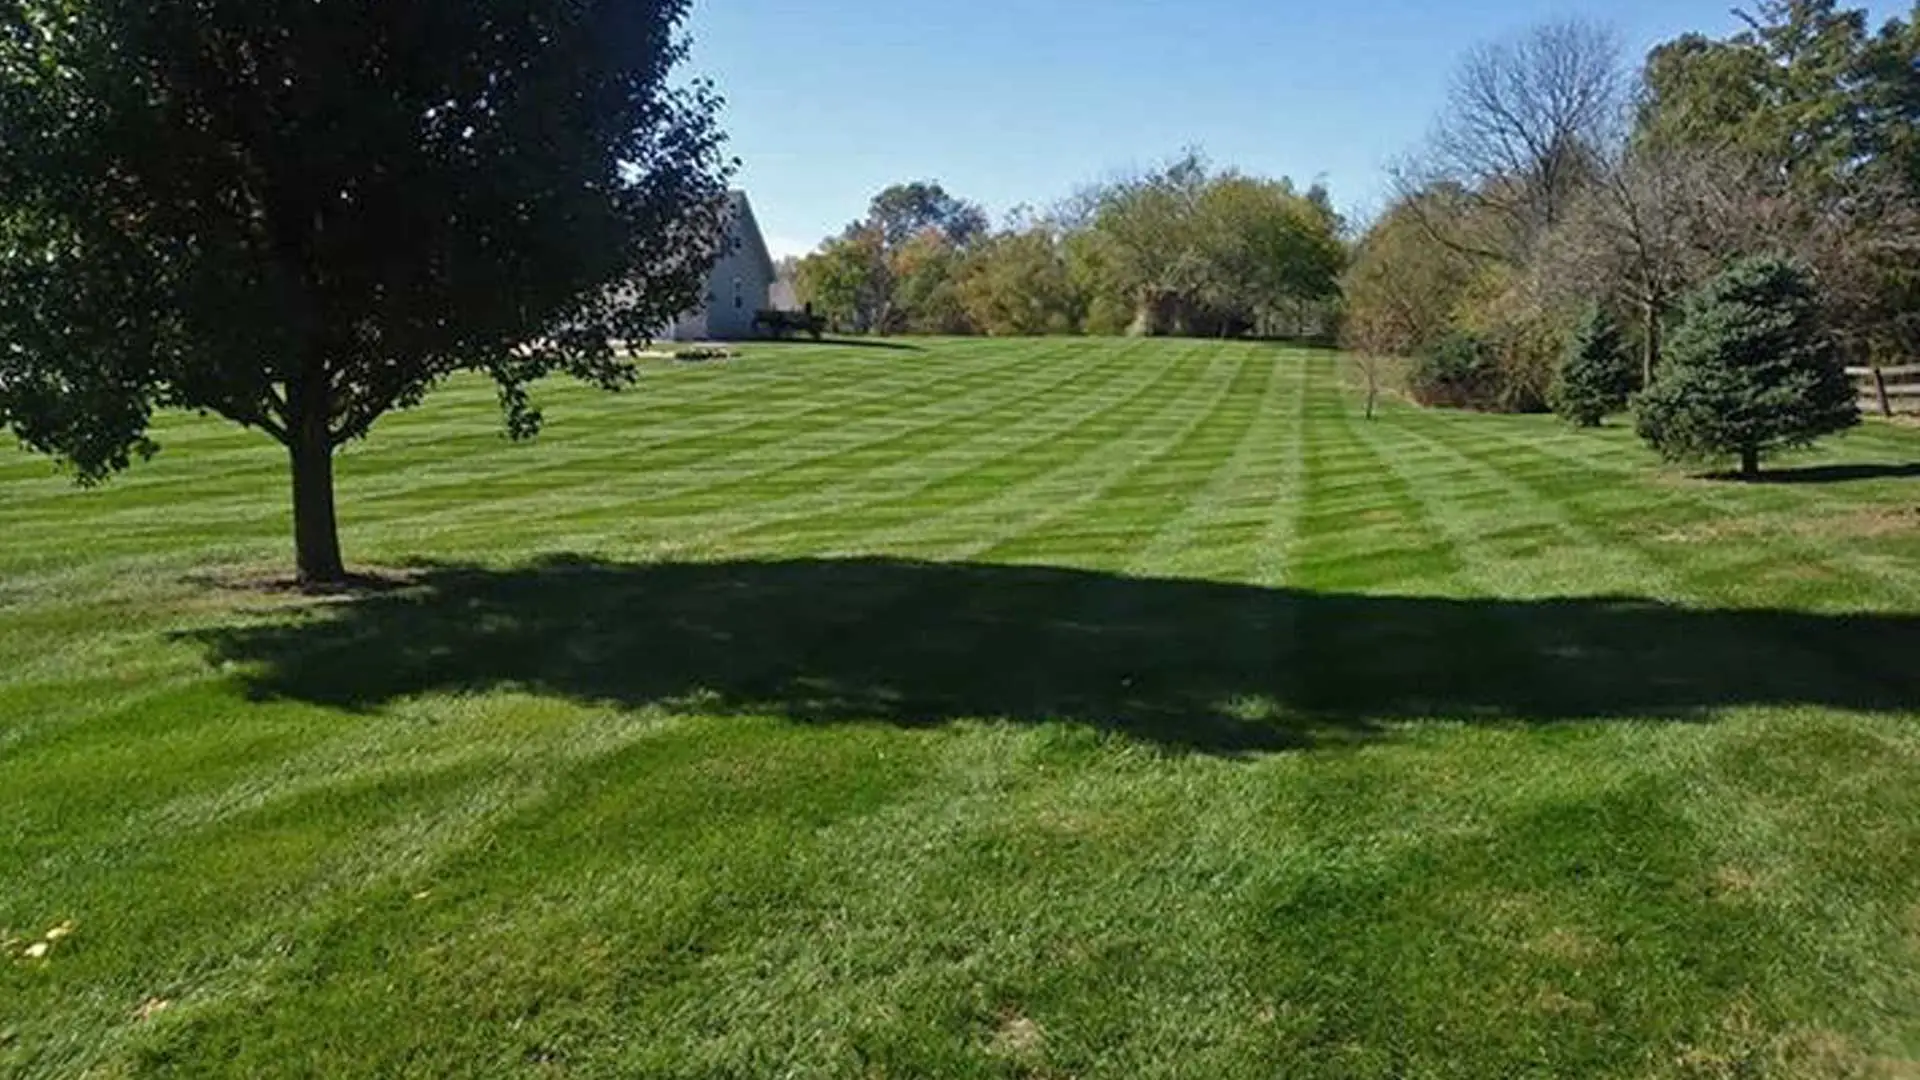 Nicely mowed lawn at a residential property in Alton, IL.